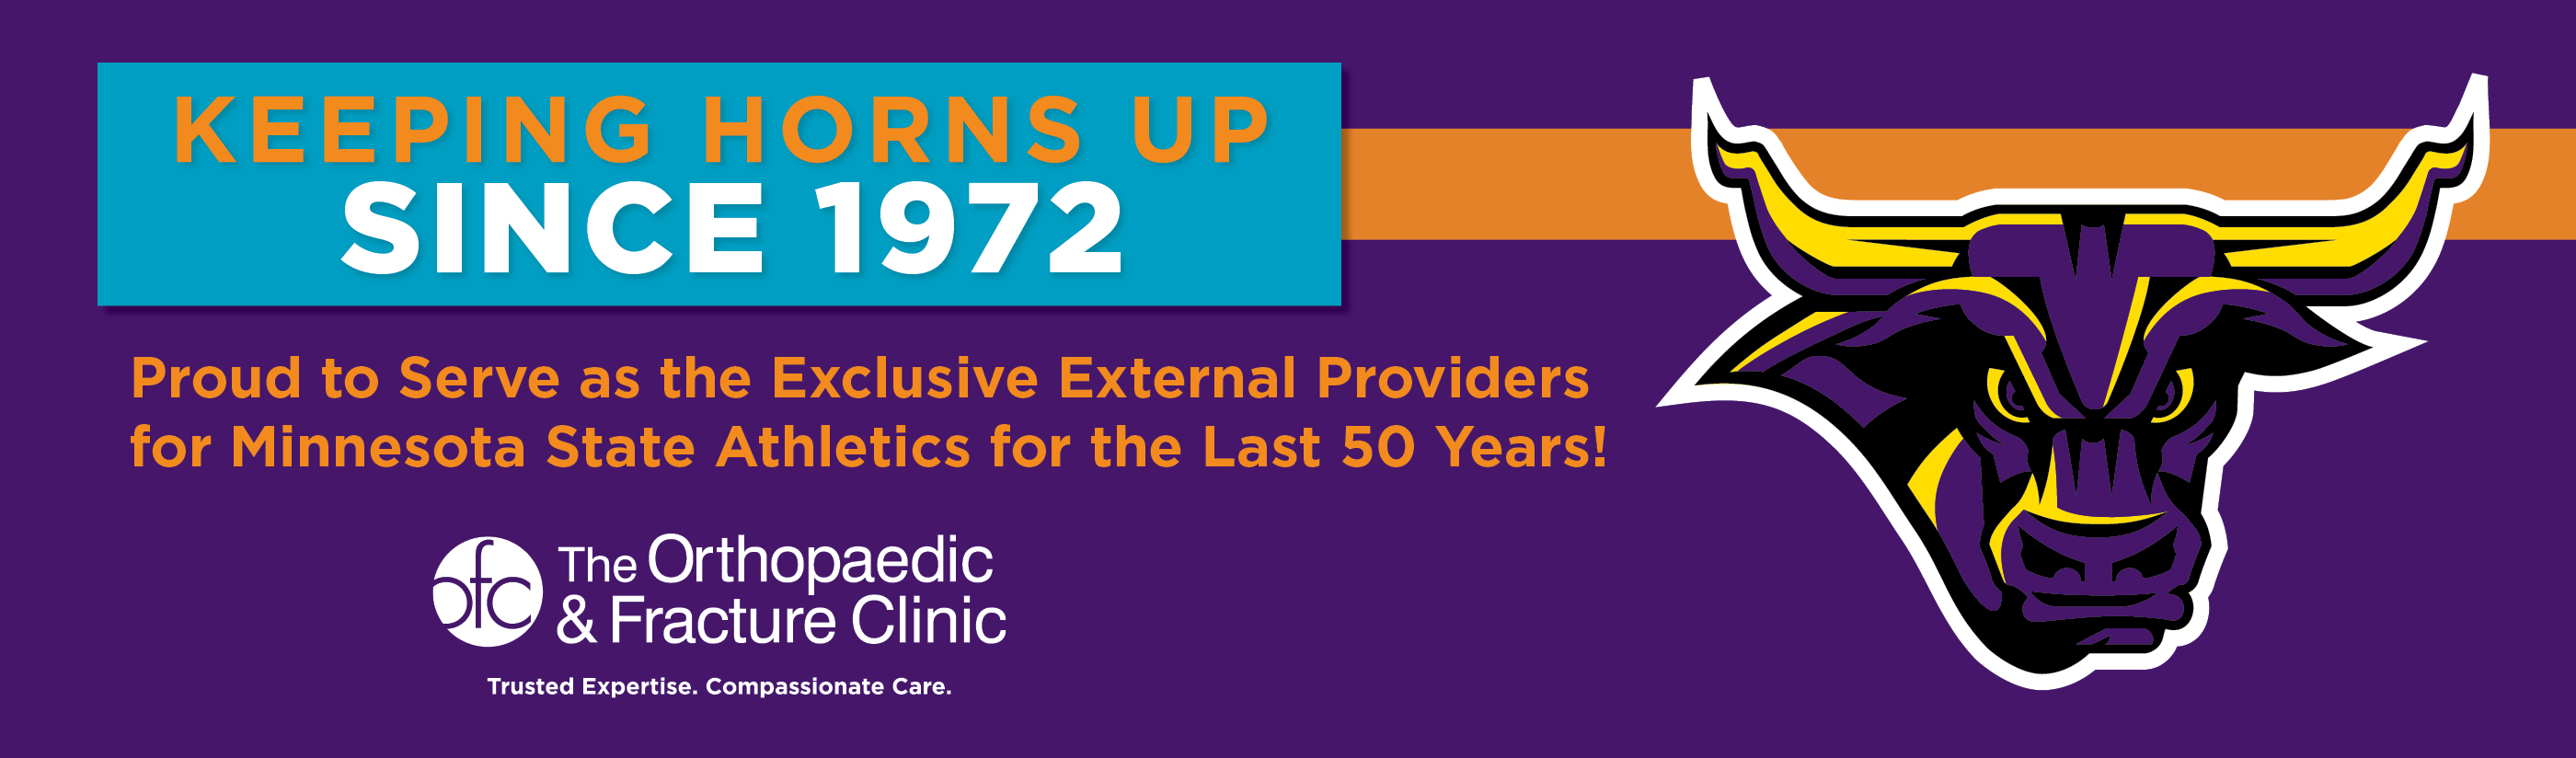 Keeping Horns Up Since 1972 – Exclusive Provider for Minnesota State Athletics